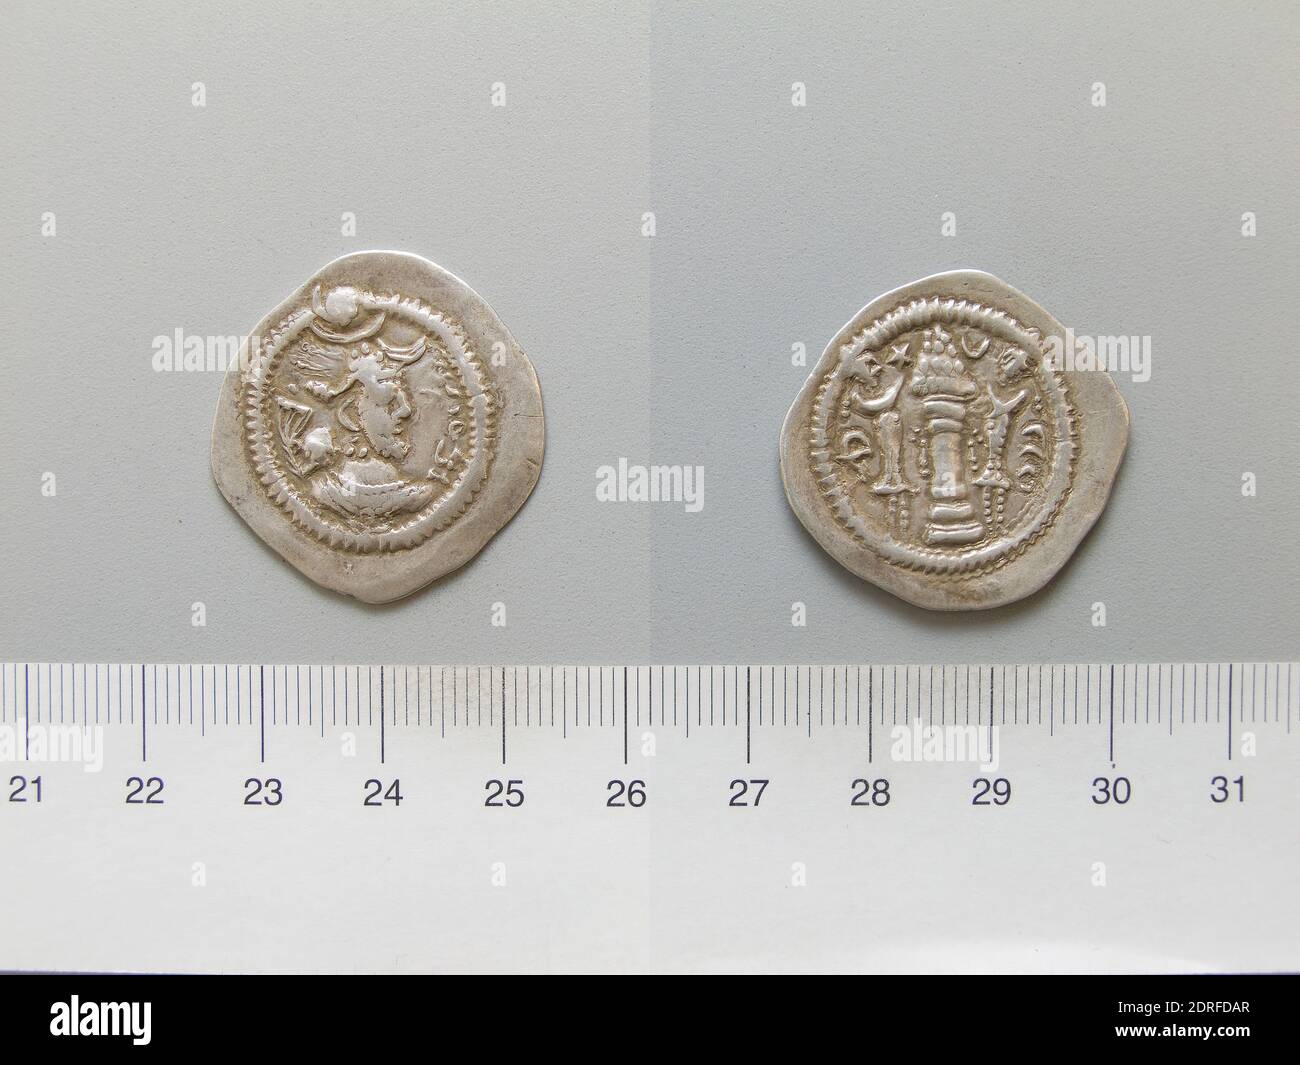 Ruler: Peroz I, 457/459-484 A.D.Mint: Persis, 1 Drachm of Peroz I from Persis, A.D. 457/59–484, Silver, 4.09 g, 3:00, 28 mm, Made in Persis, Greek, 5th century A.D., Numismatics Stock Photo